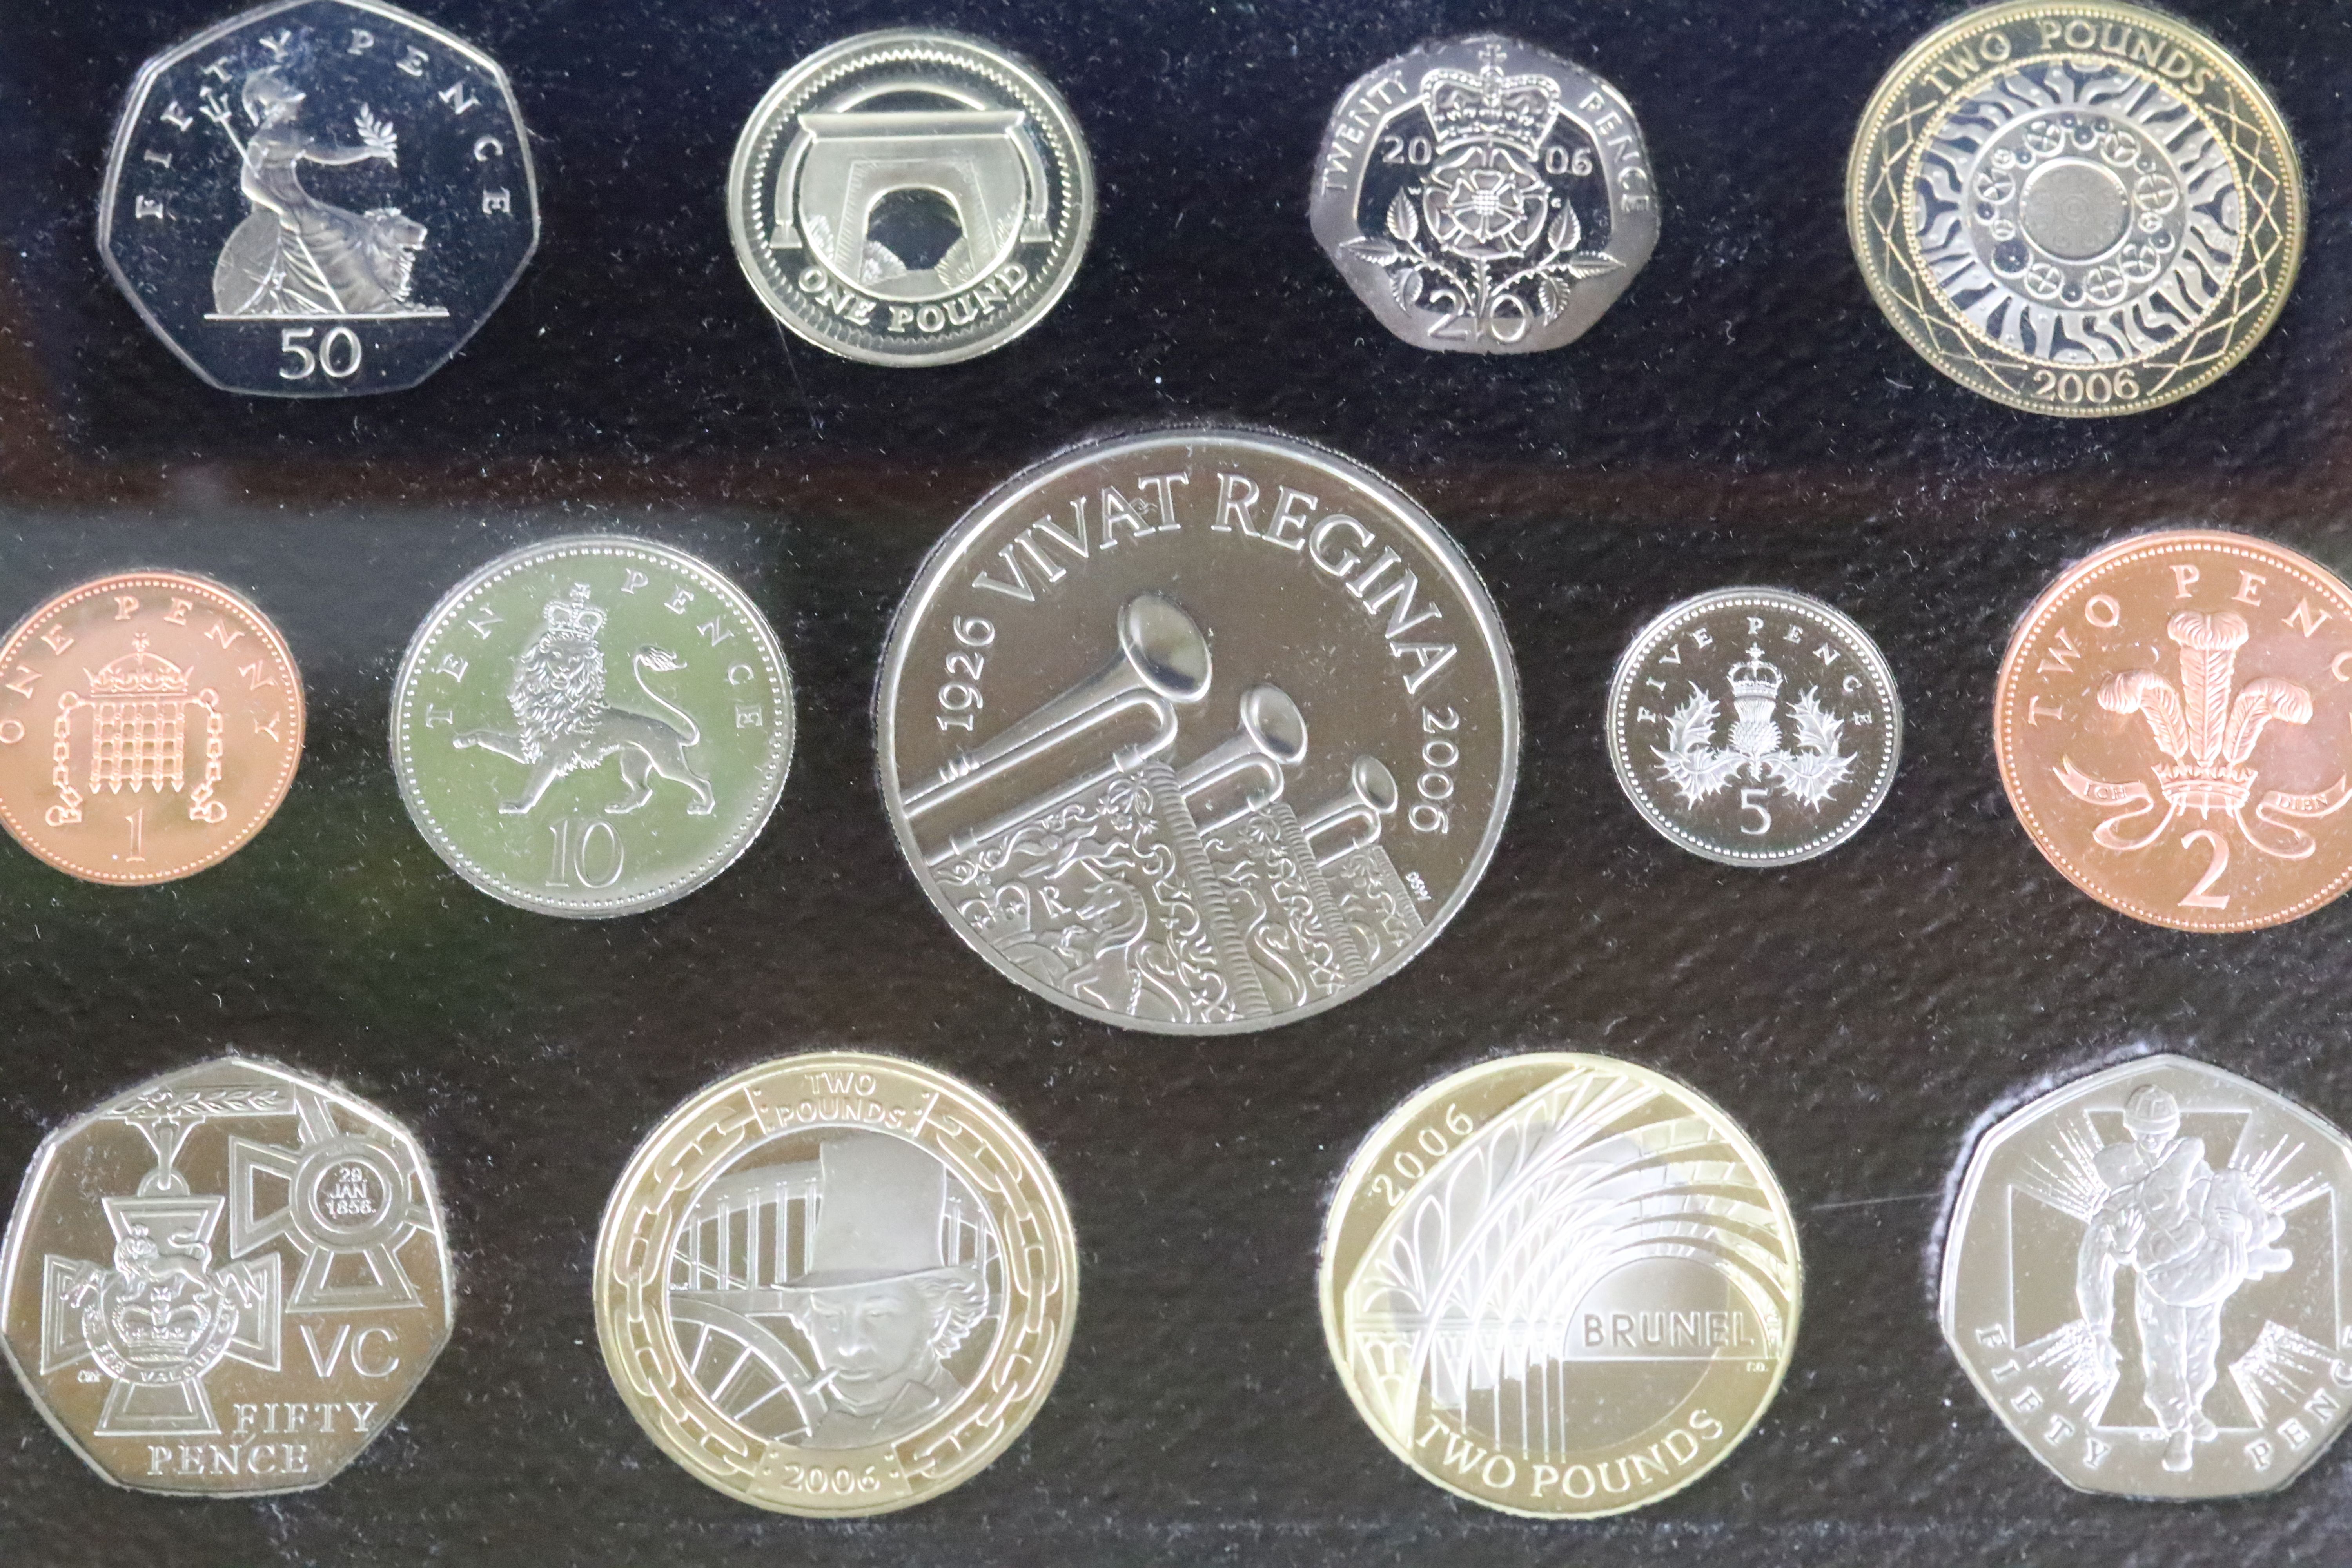 A Royal Mint United Kingdom 2006 Executive twelve coin proof set, set within wooden presentation - Image 2 of 5